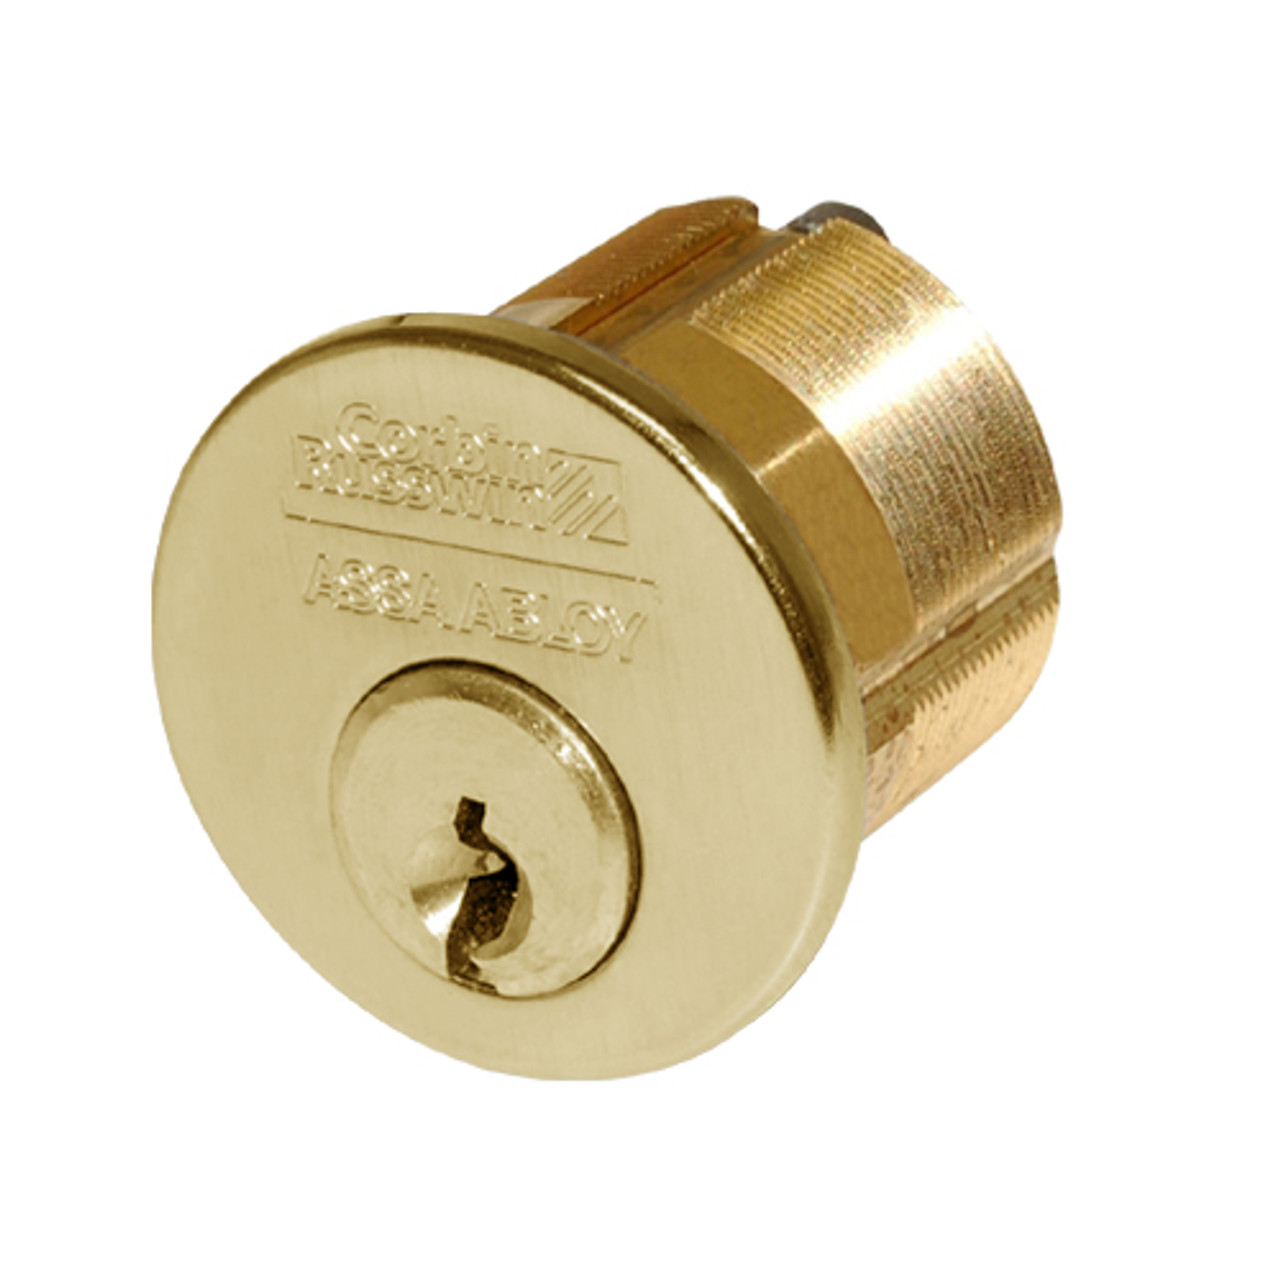 CR1000-200-A02-6-57B1-605 Corbin Conventional Mortise Cylinder for Mortise Lock and DL3000 Deadlocks with Straight Cam in Bright Brass Finish